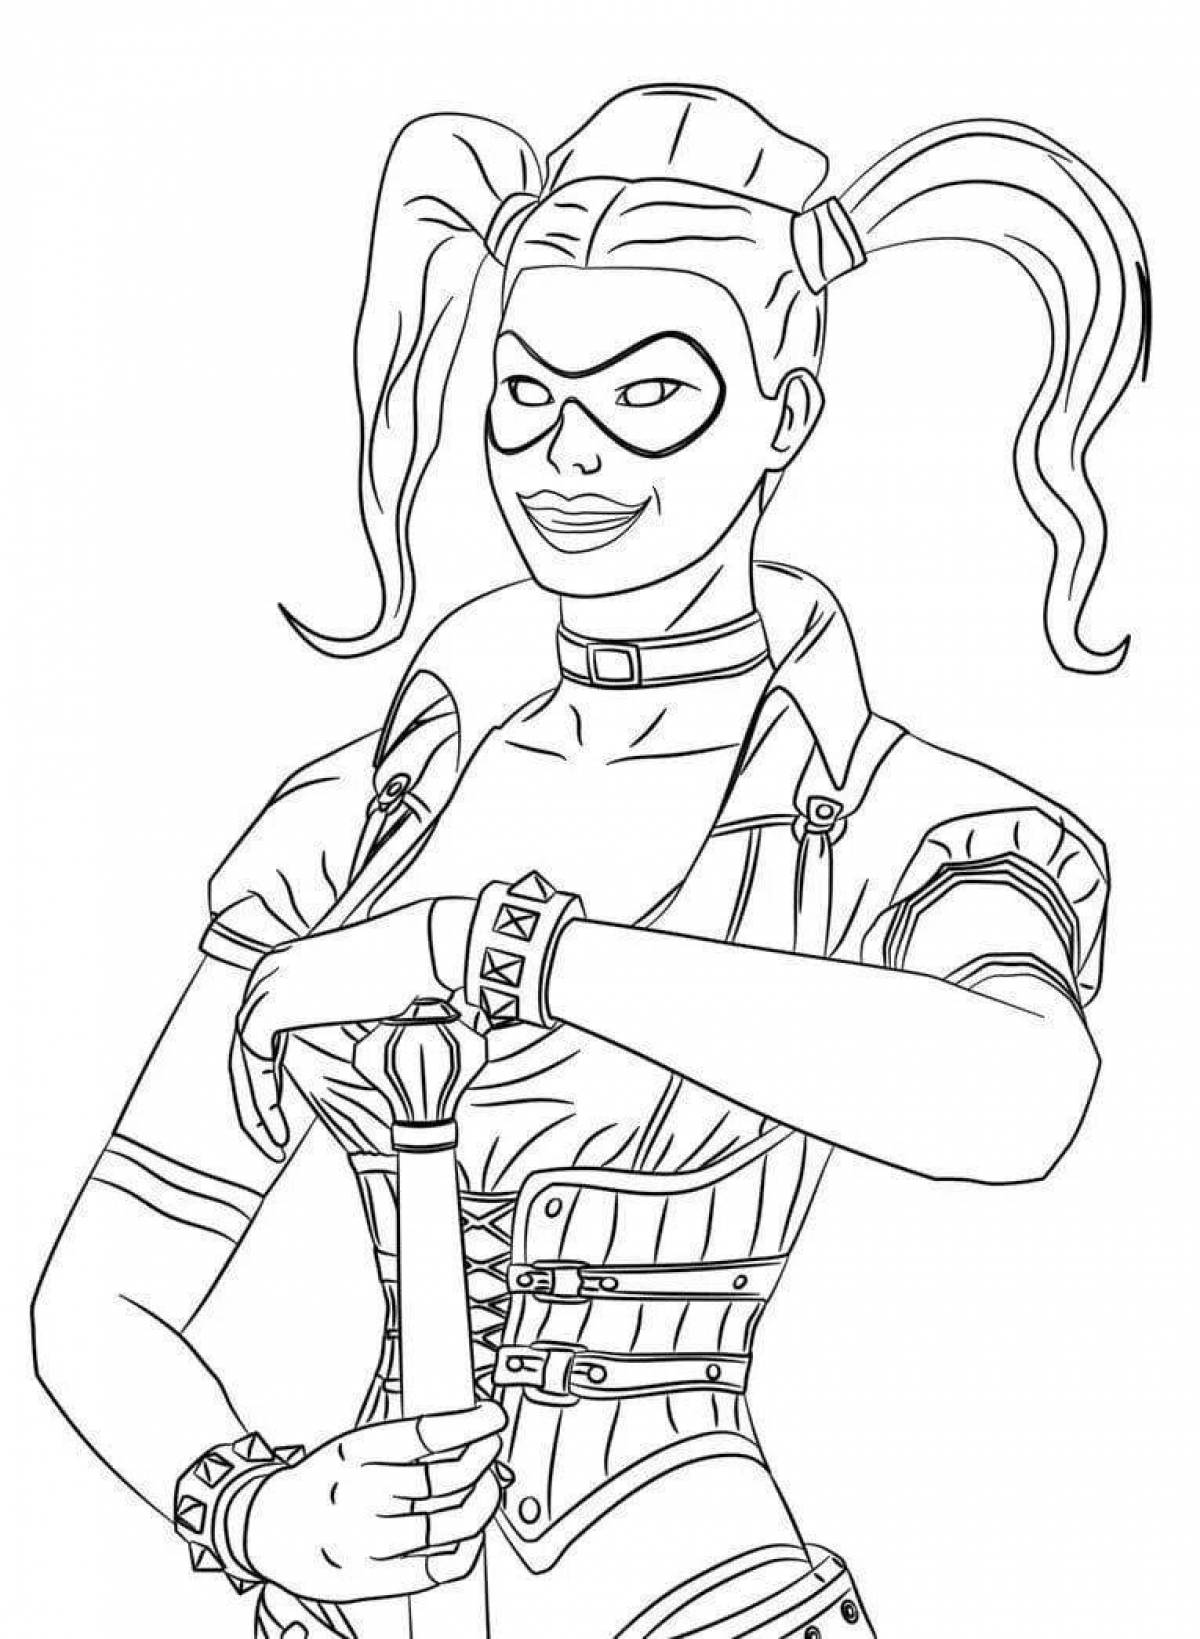 Suicide squad inspirational coloring book